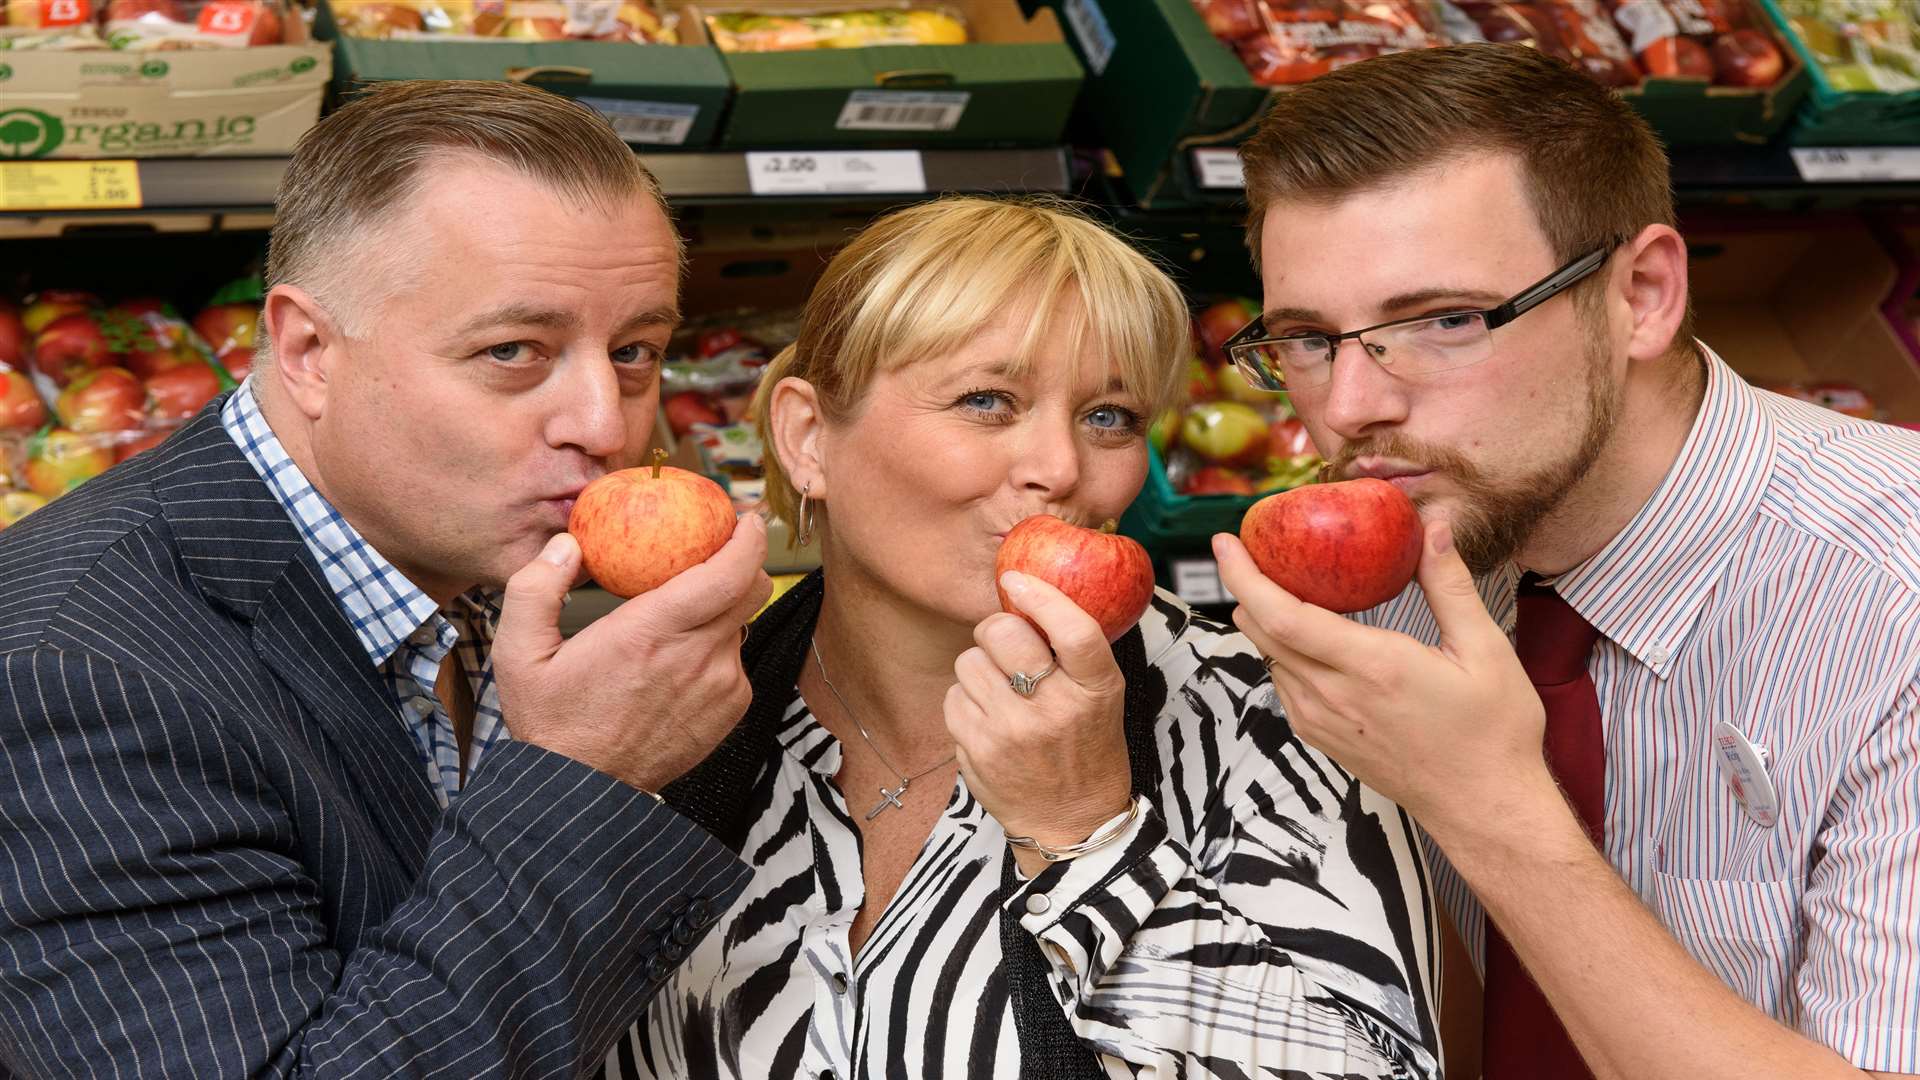 Winner of the Name the Apple Competition, Jacqui Lalley (centre), with Michael Joyles from Avalon Produce (left) and John Worth, Tesco Apple buyer (right).